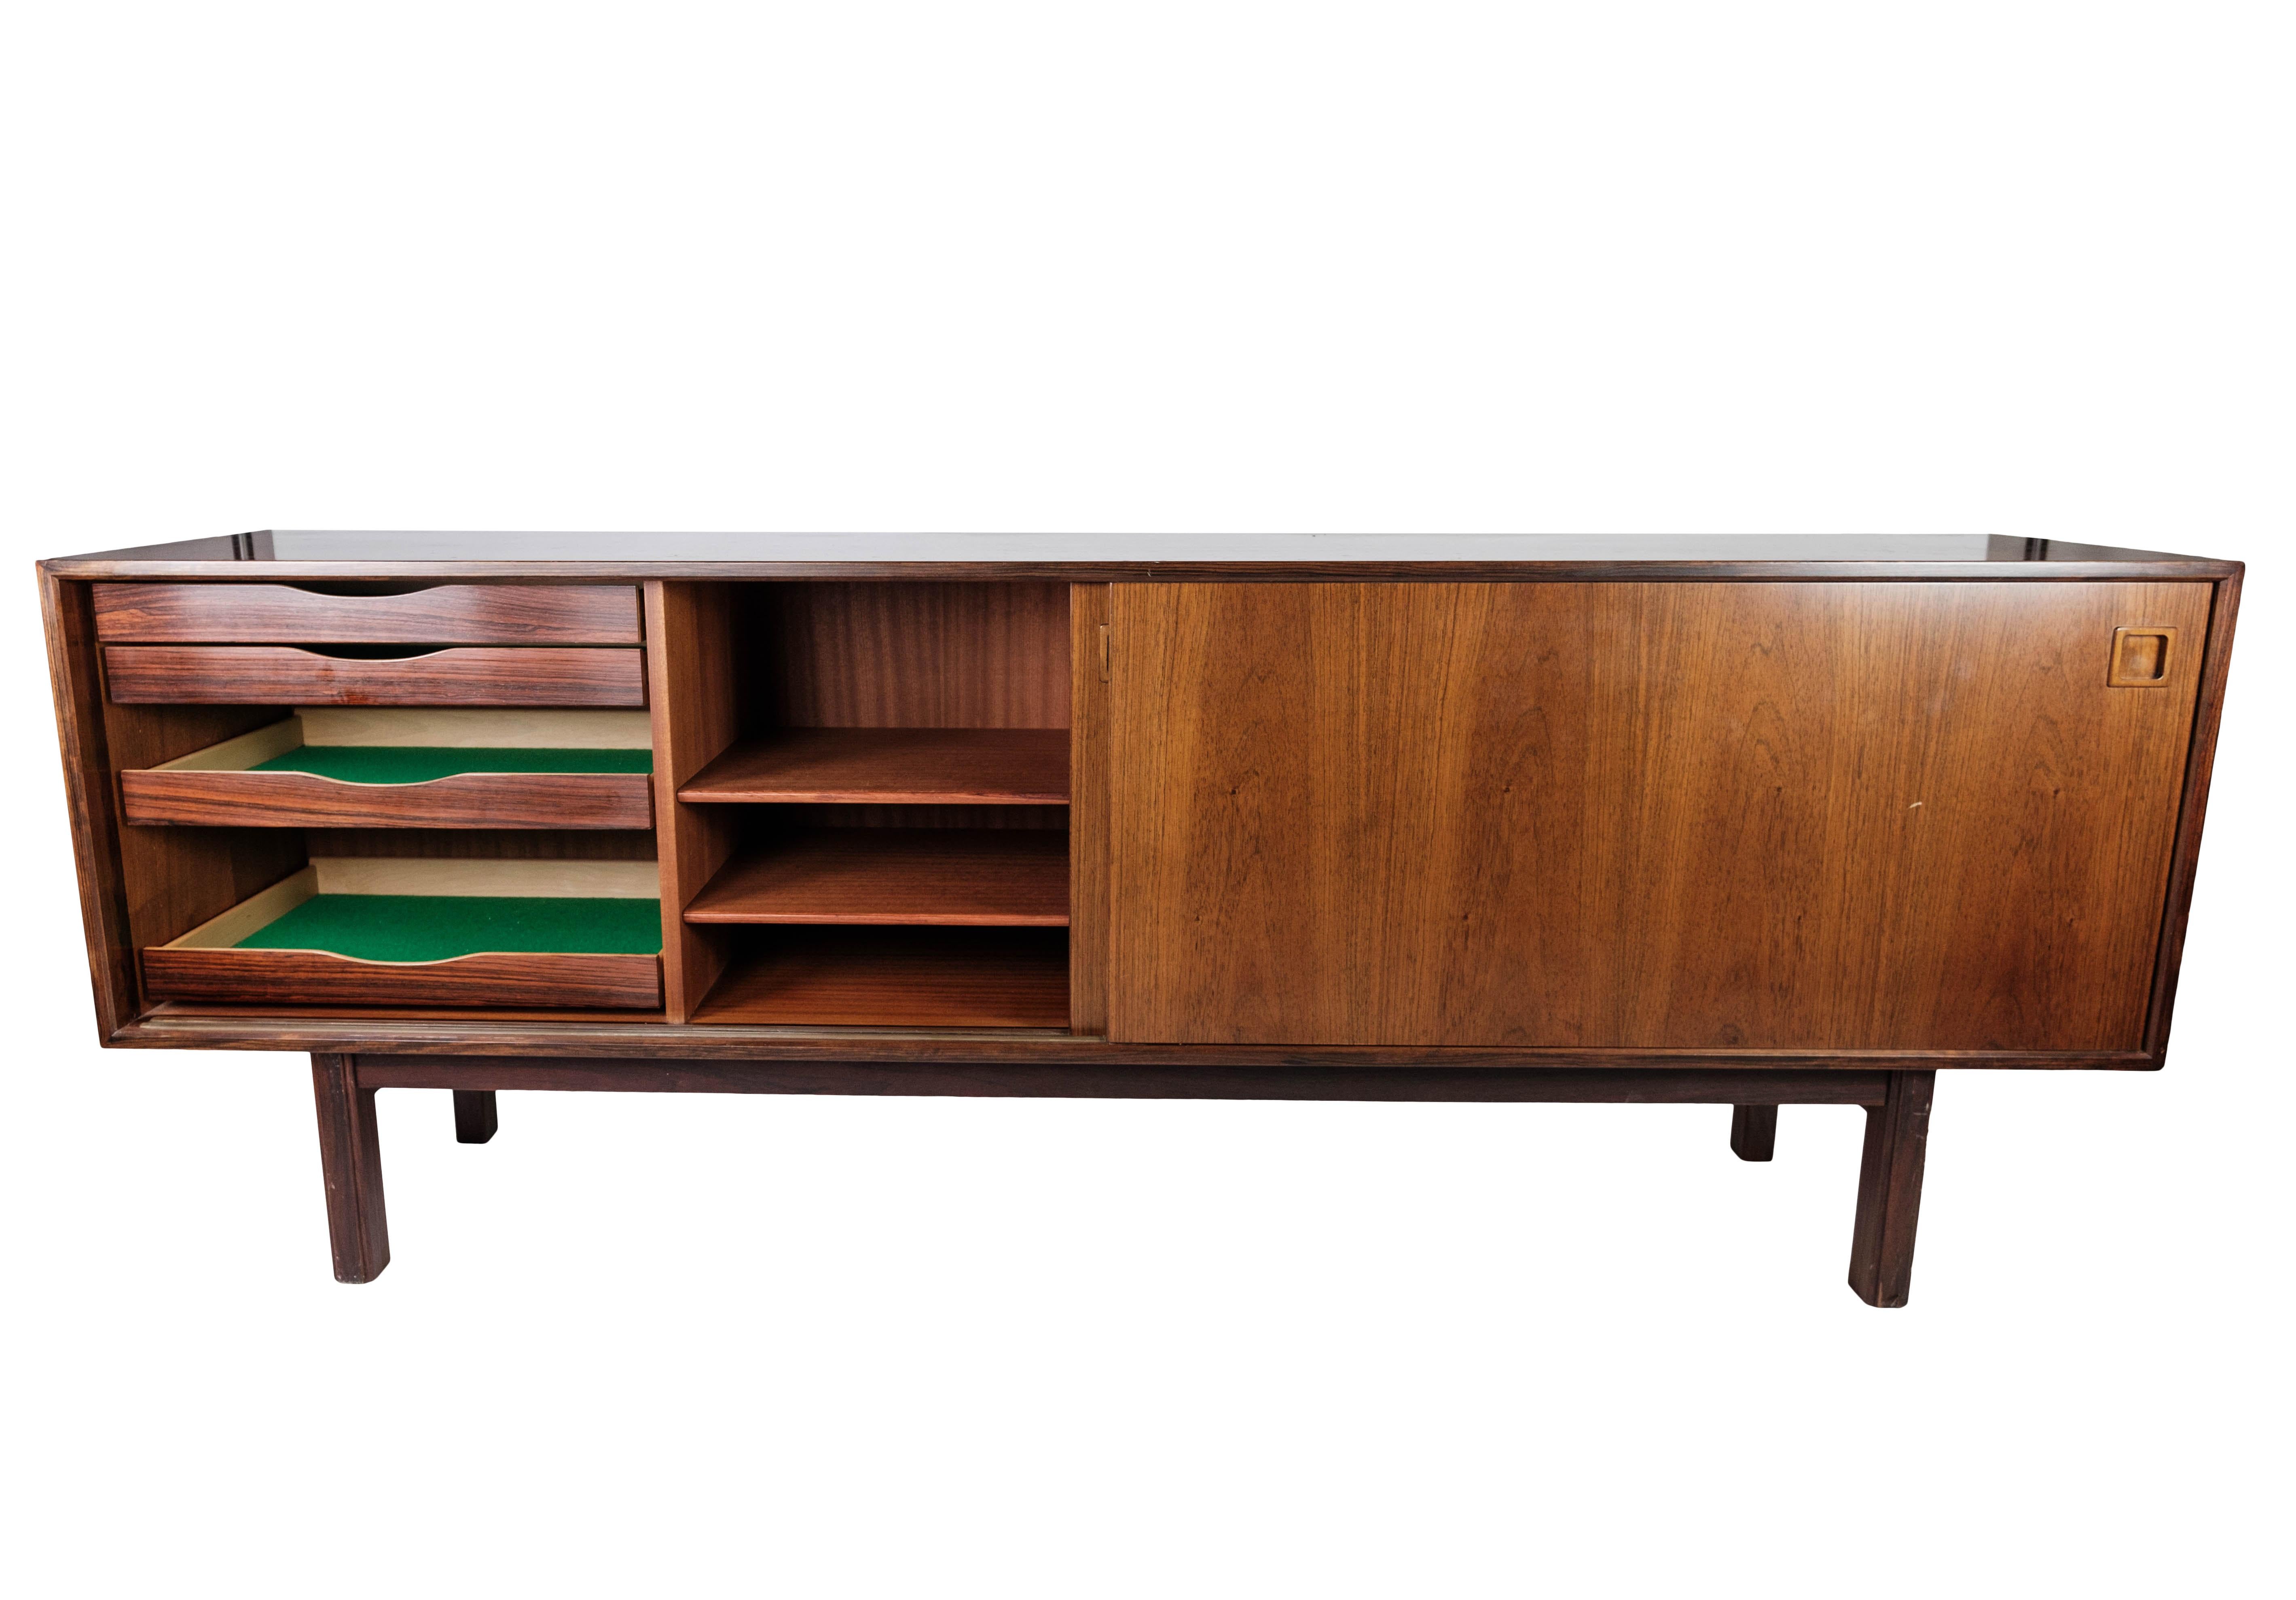 Scandinavian Modern Sideboard in Rosewood with Sliding Doors Designed by Omann Junior from the 1960s